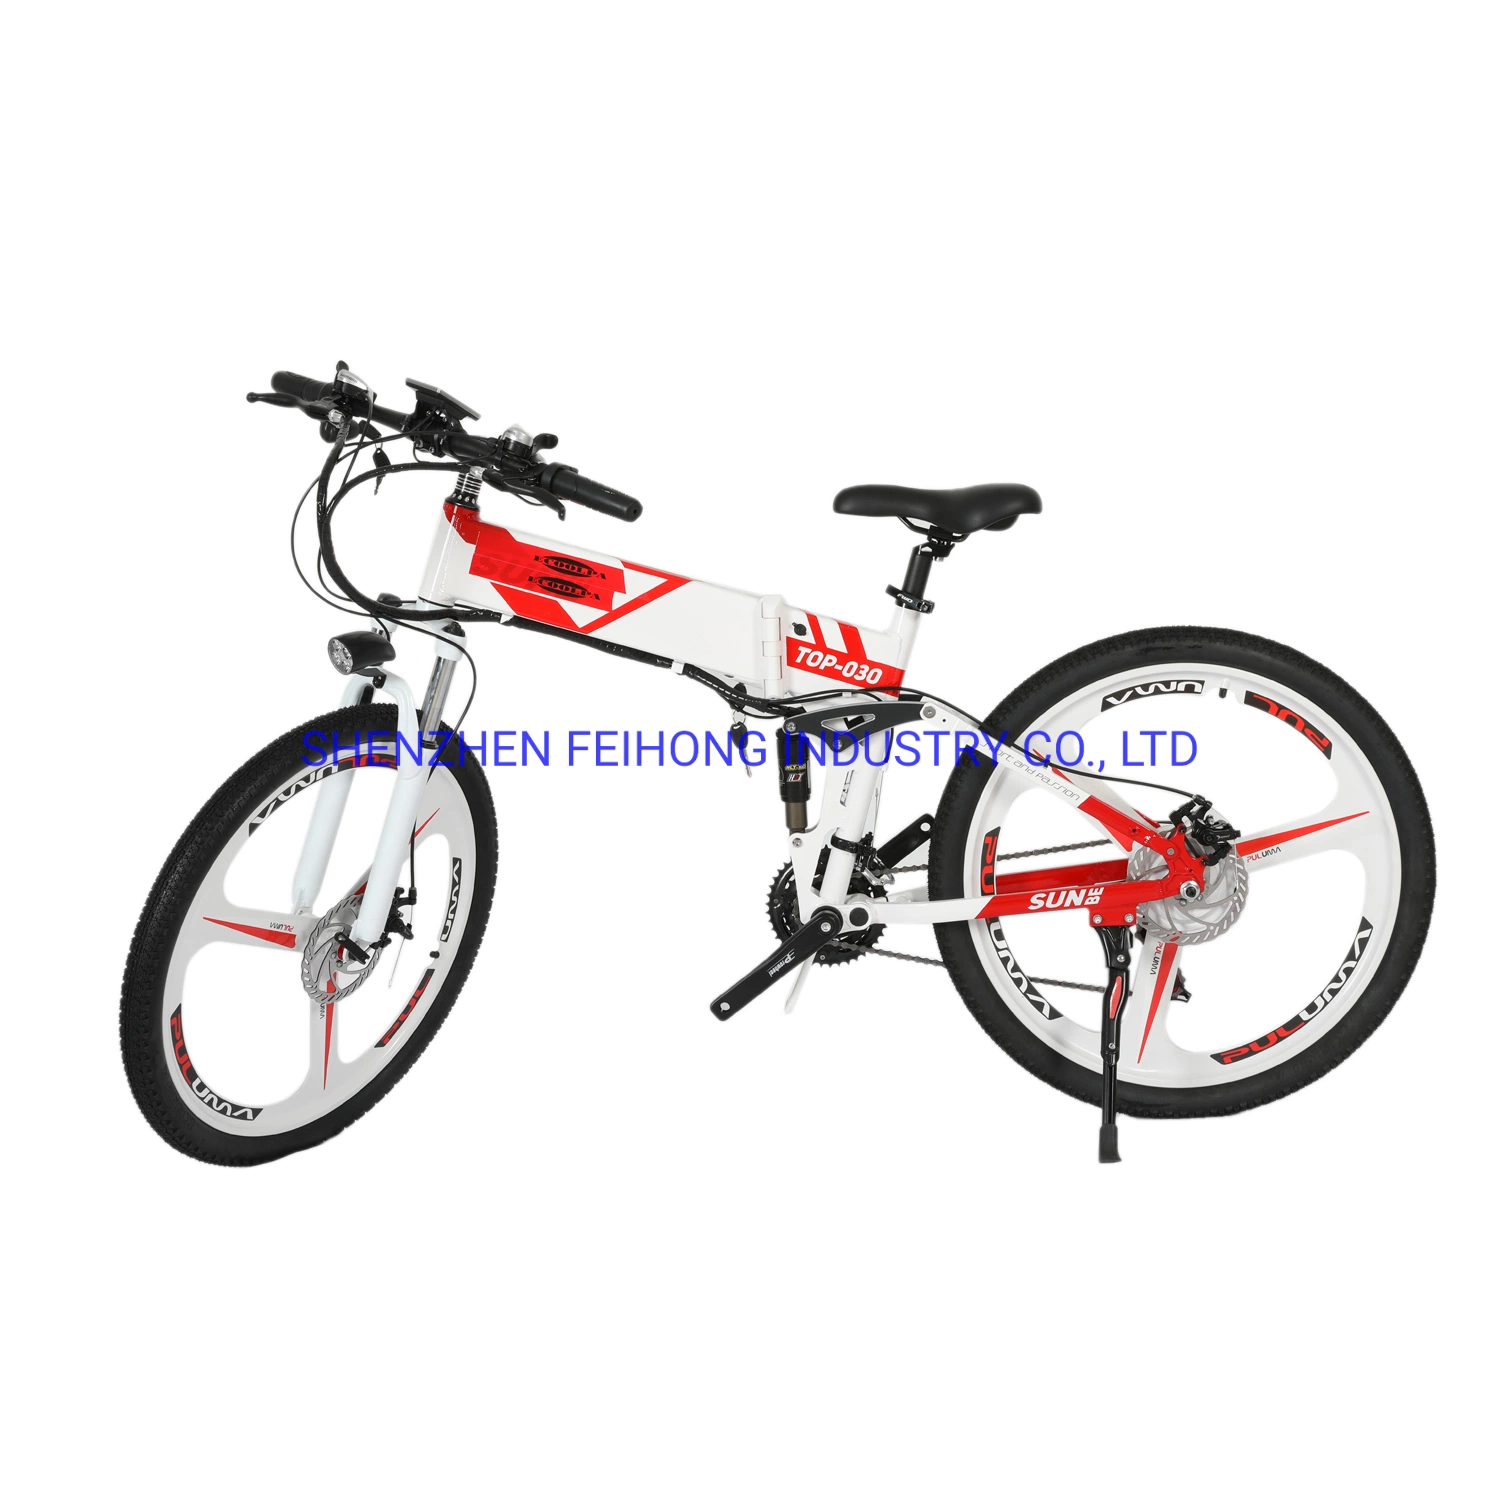 26" Motorcycle Electric Scooter Bicycle Electric Bike Electric Motorcycle Scooter Motor Scooter System Duild in Detachable Battery 48V 500W Motor Dirt Bike